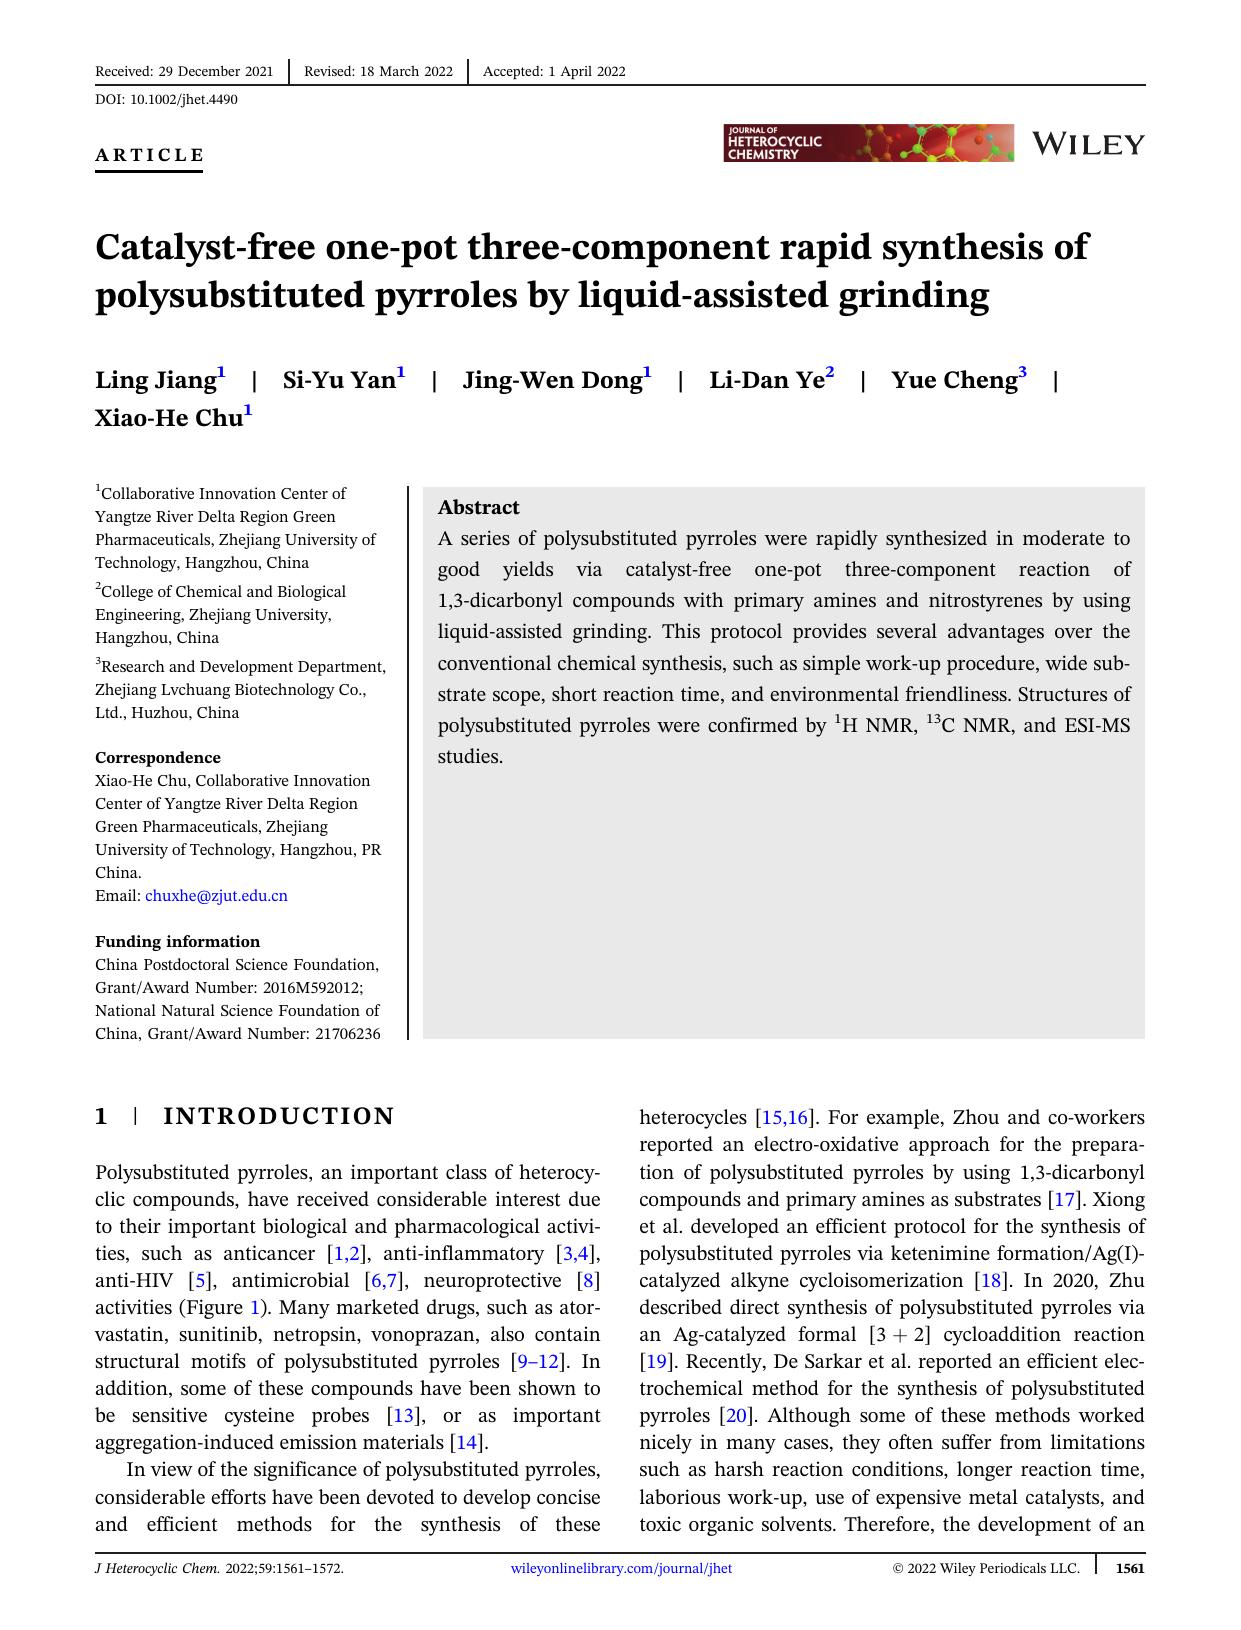 Catalyst-free one-pot three-component rapid synthesis of polysubstituted pyrroles by liquid-assisted grinding by Unknown